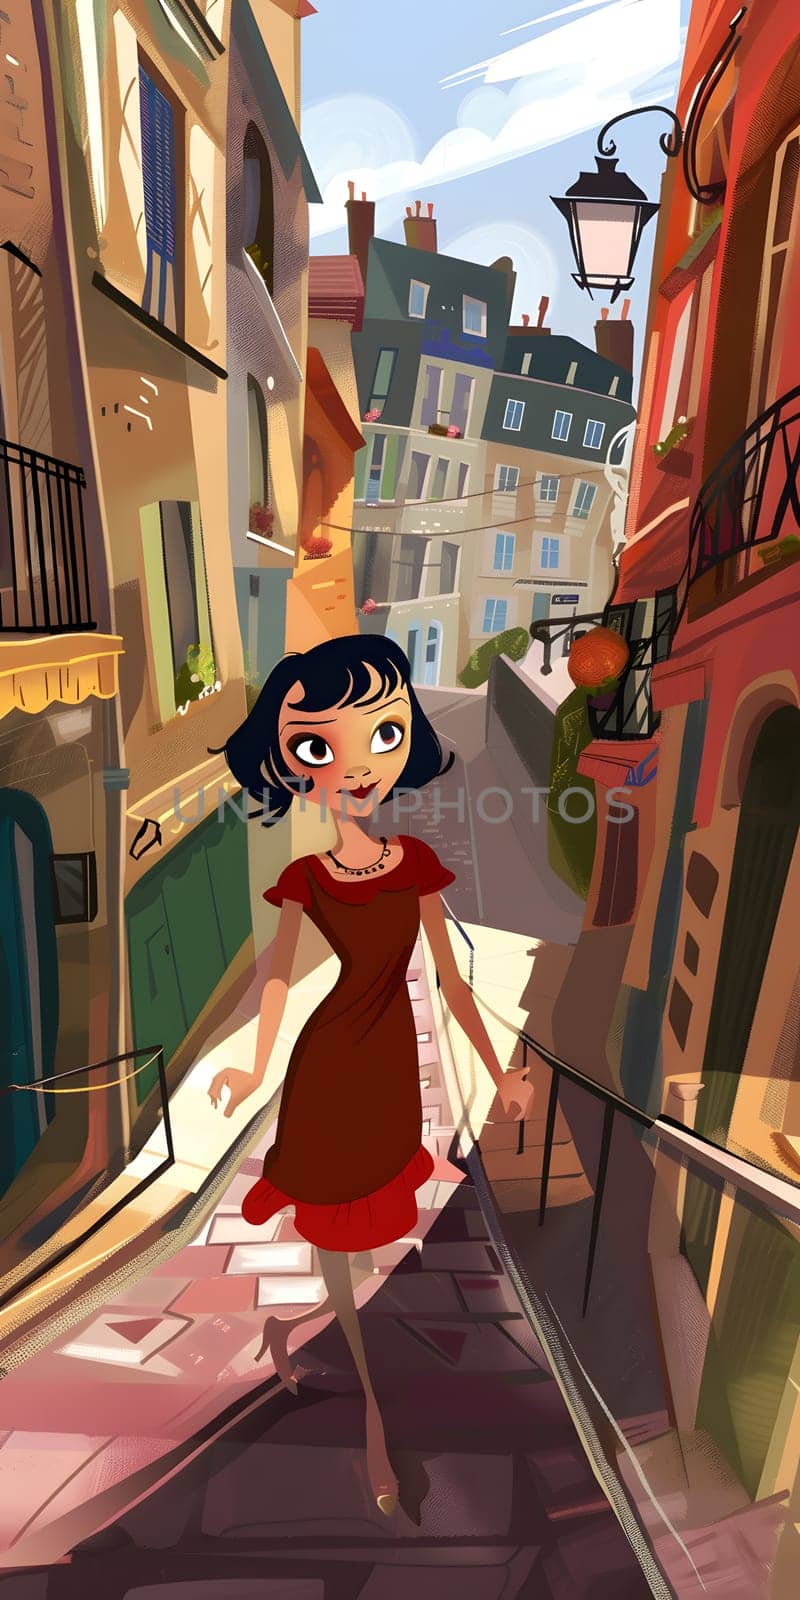 a cartoon girl in a red dress is walking down a narrow street by Nadtochiy